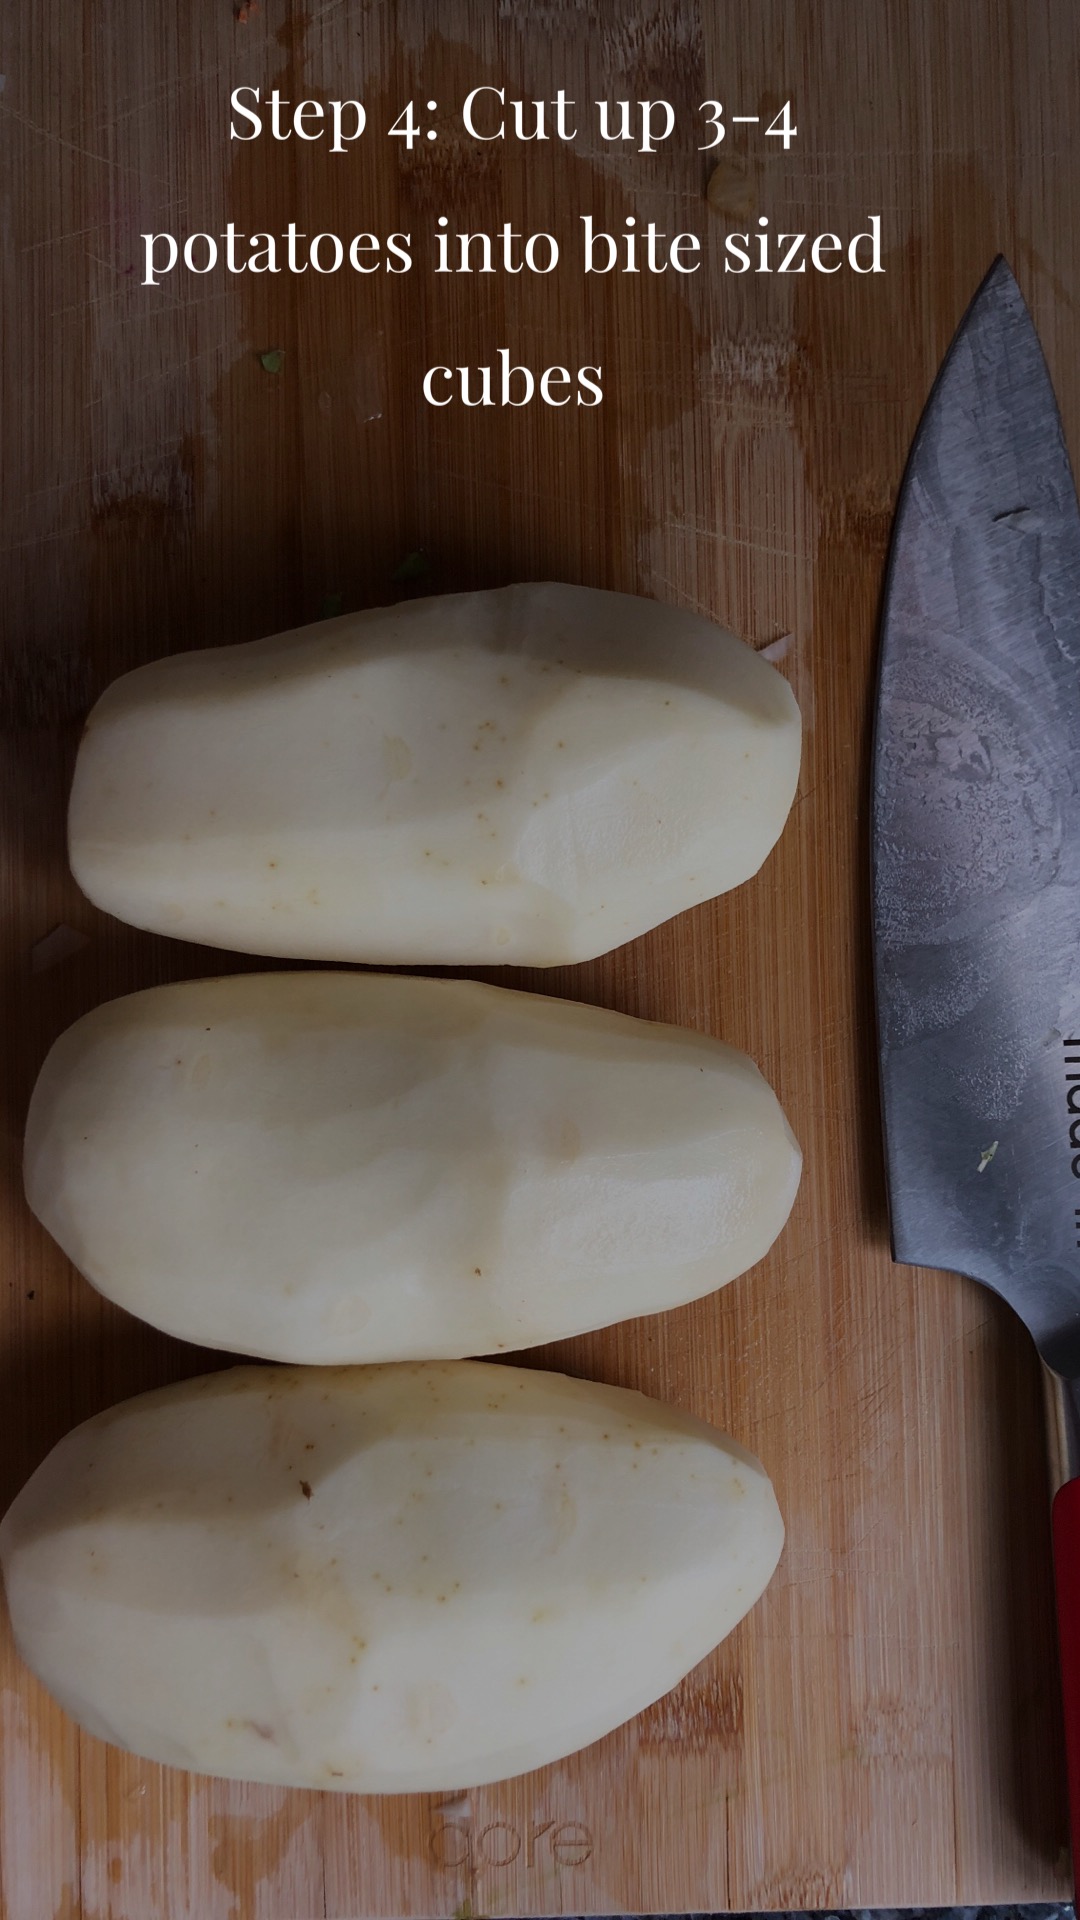 Three potatoes lined next to a knife